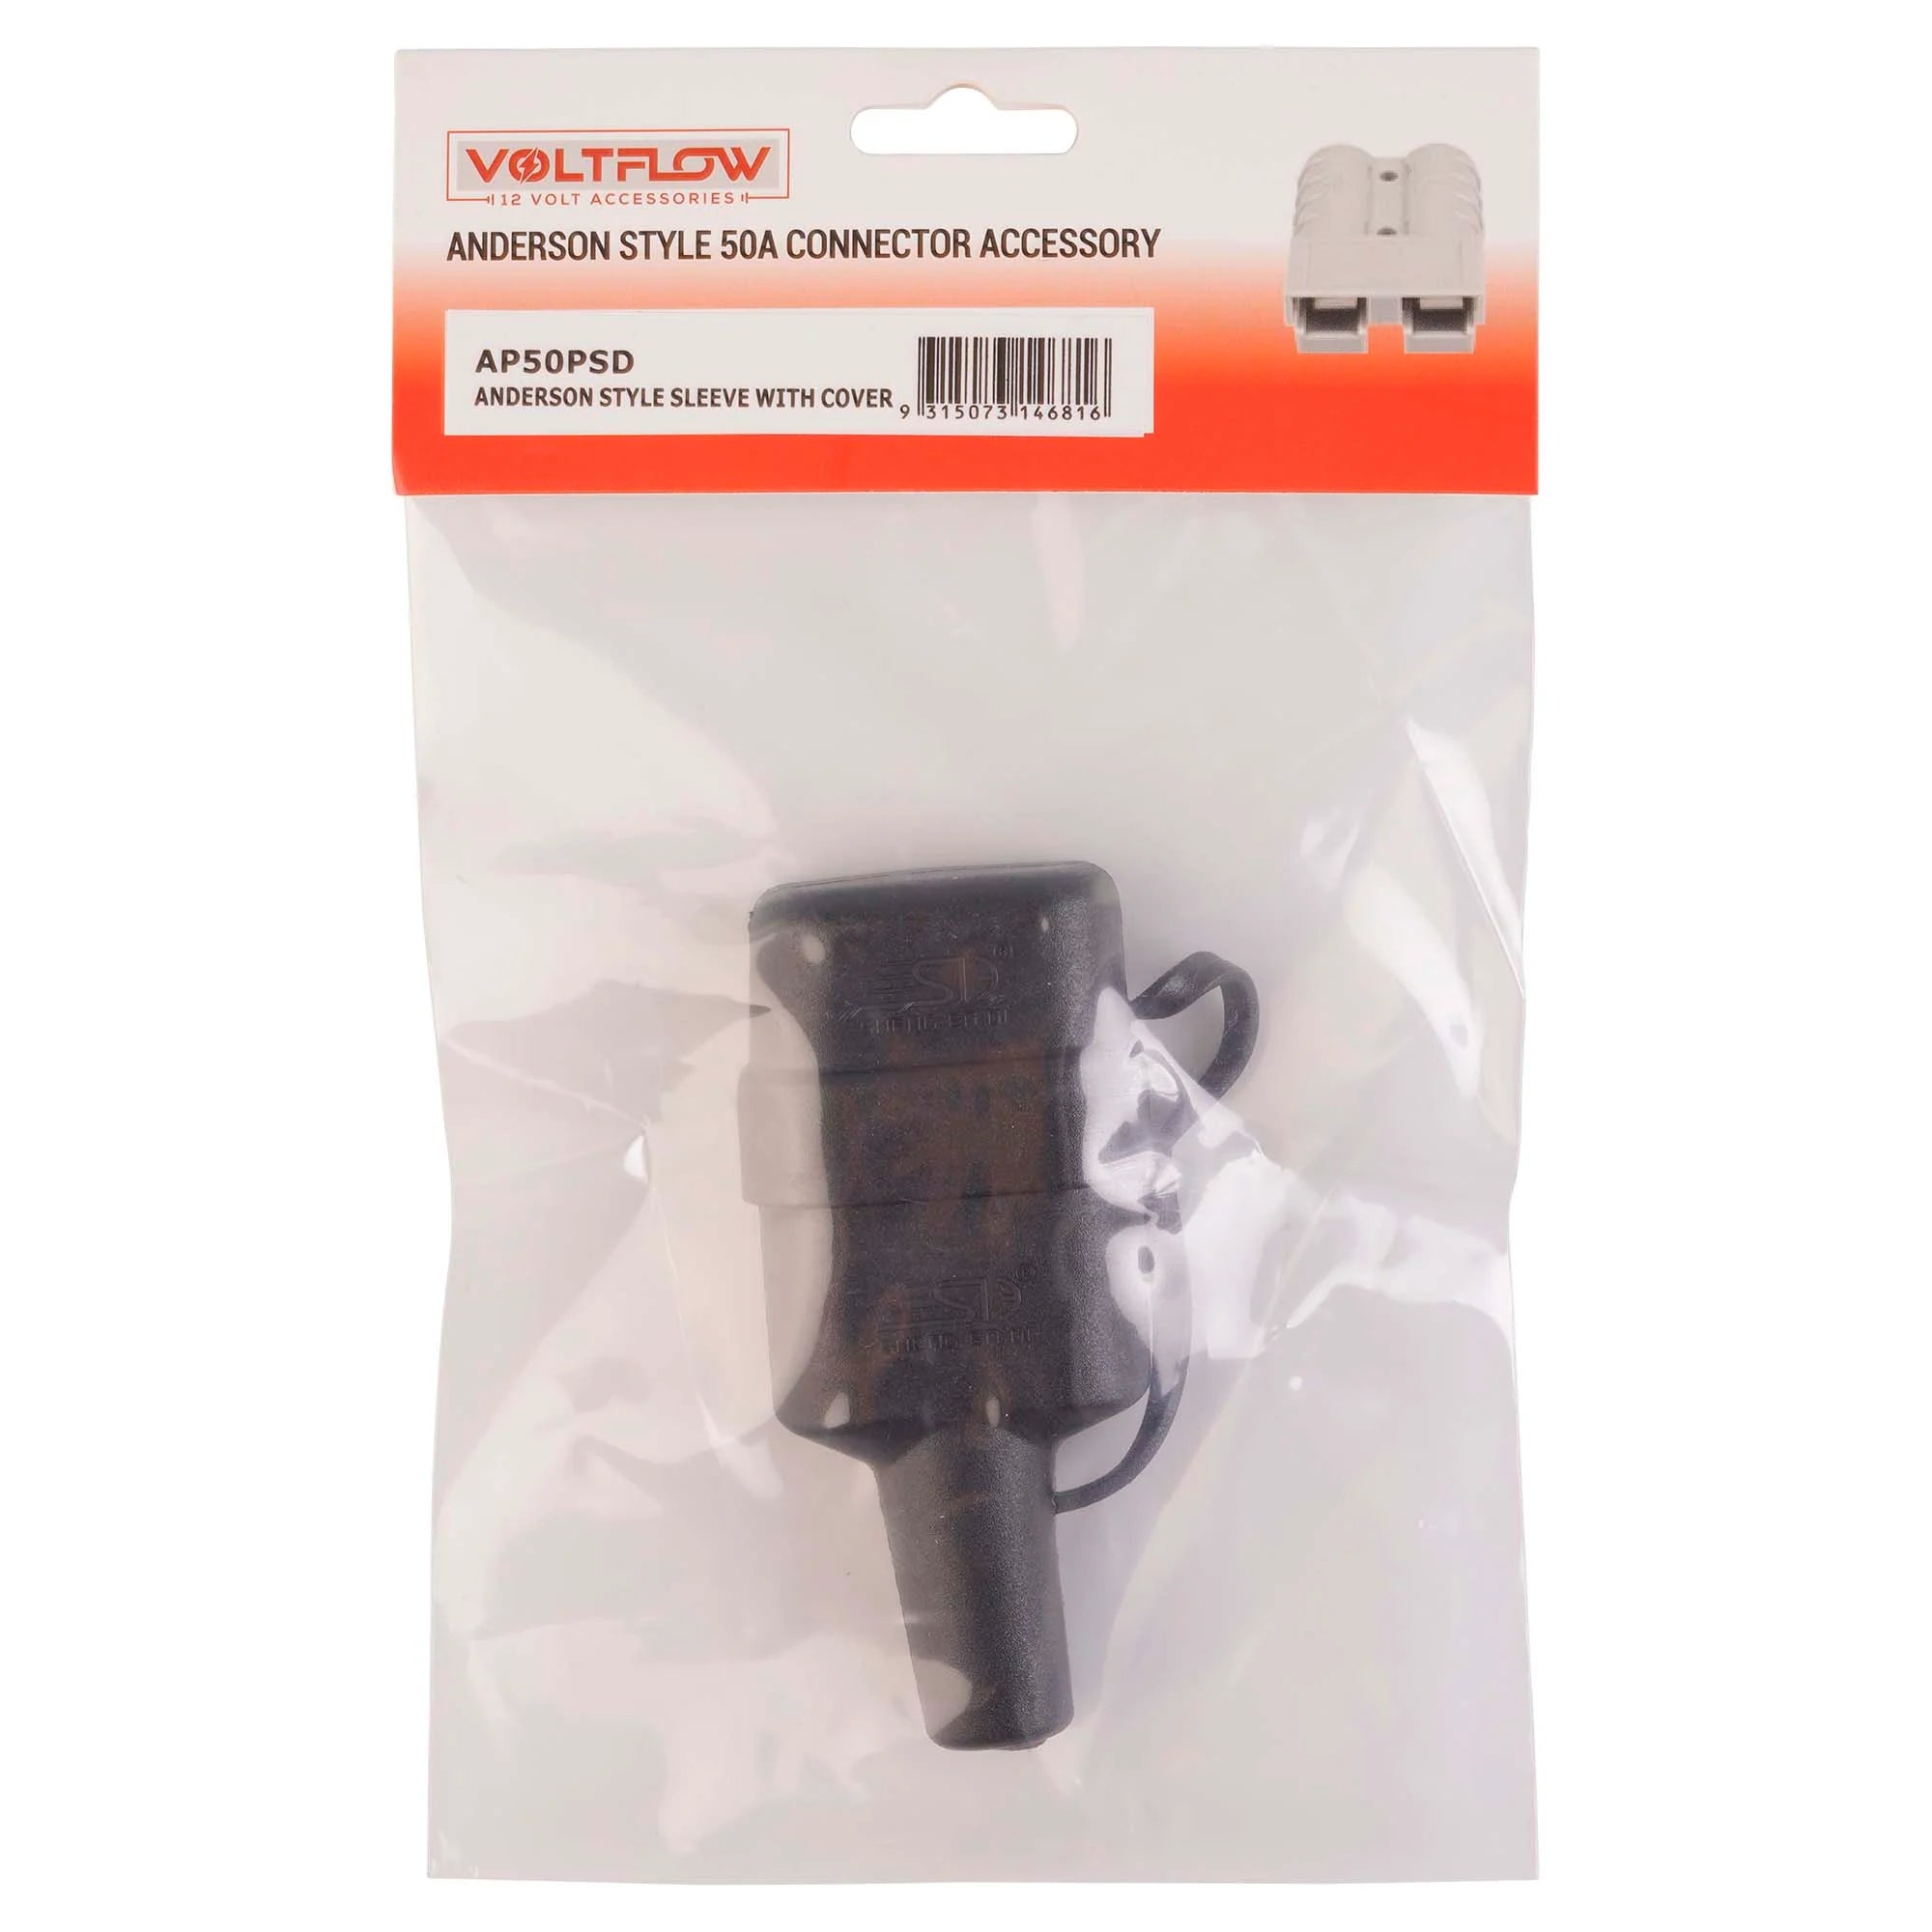 Voltflow Andersen Plug Sleeve with Cover - AP50PSD